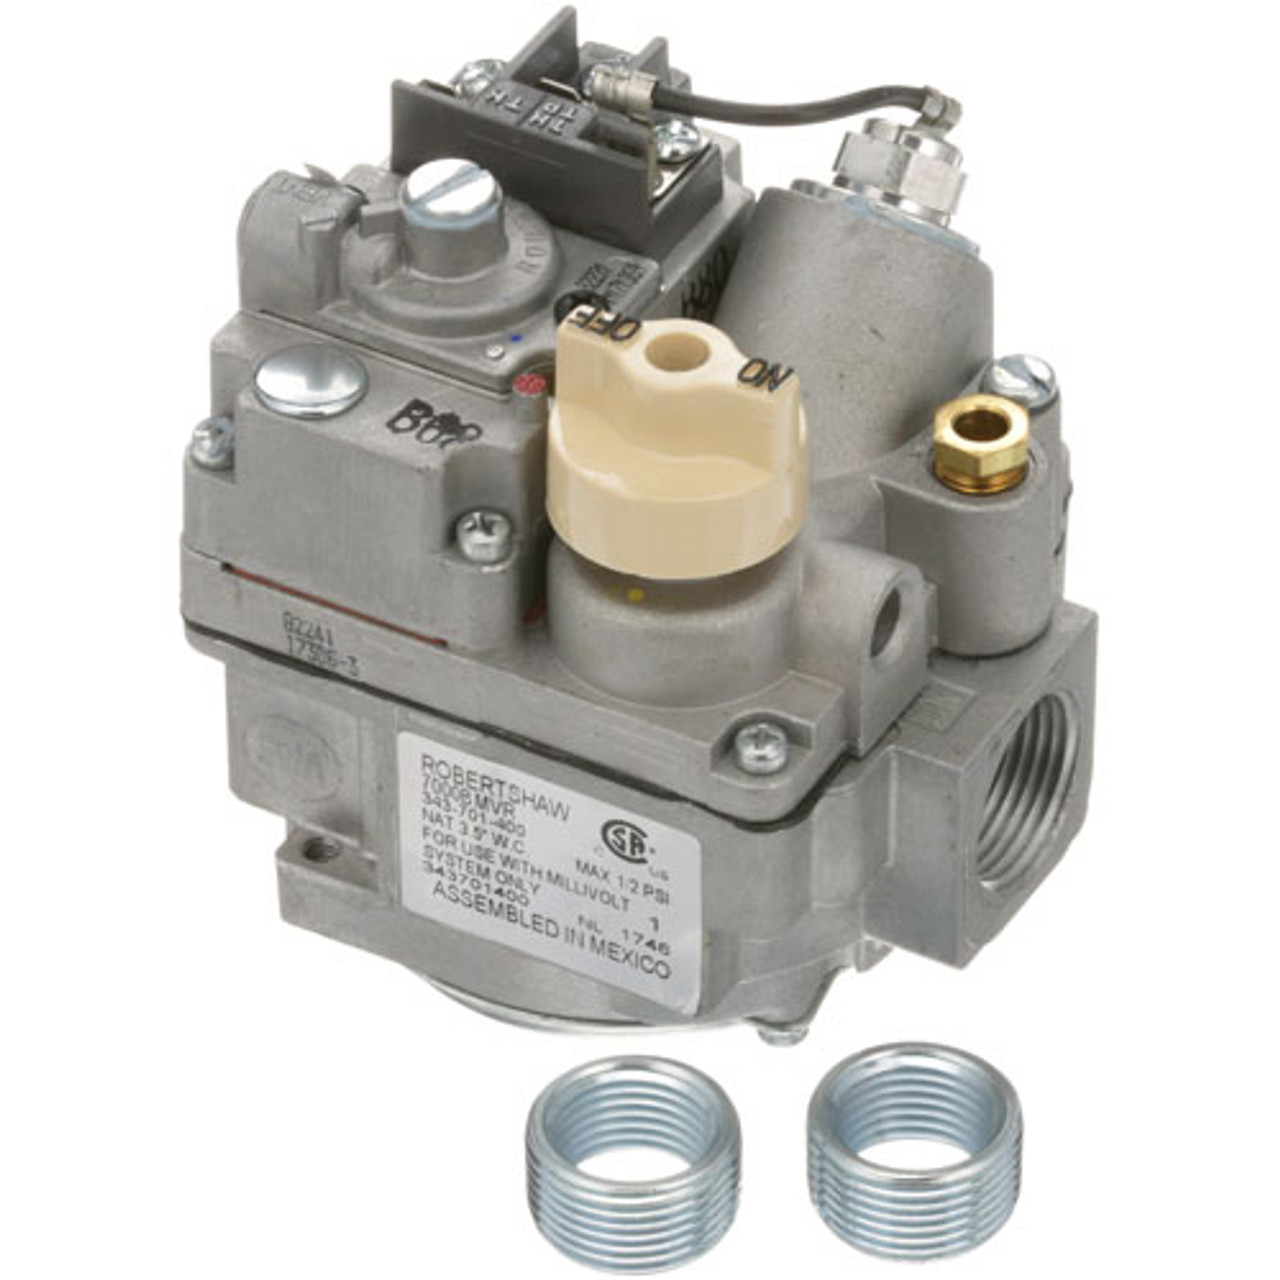 Gas Control - Replacement Part For Cecilware L347F